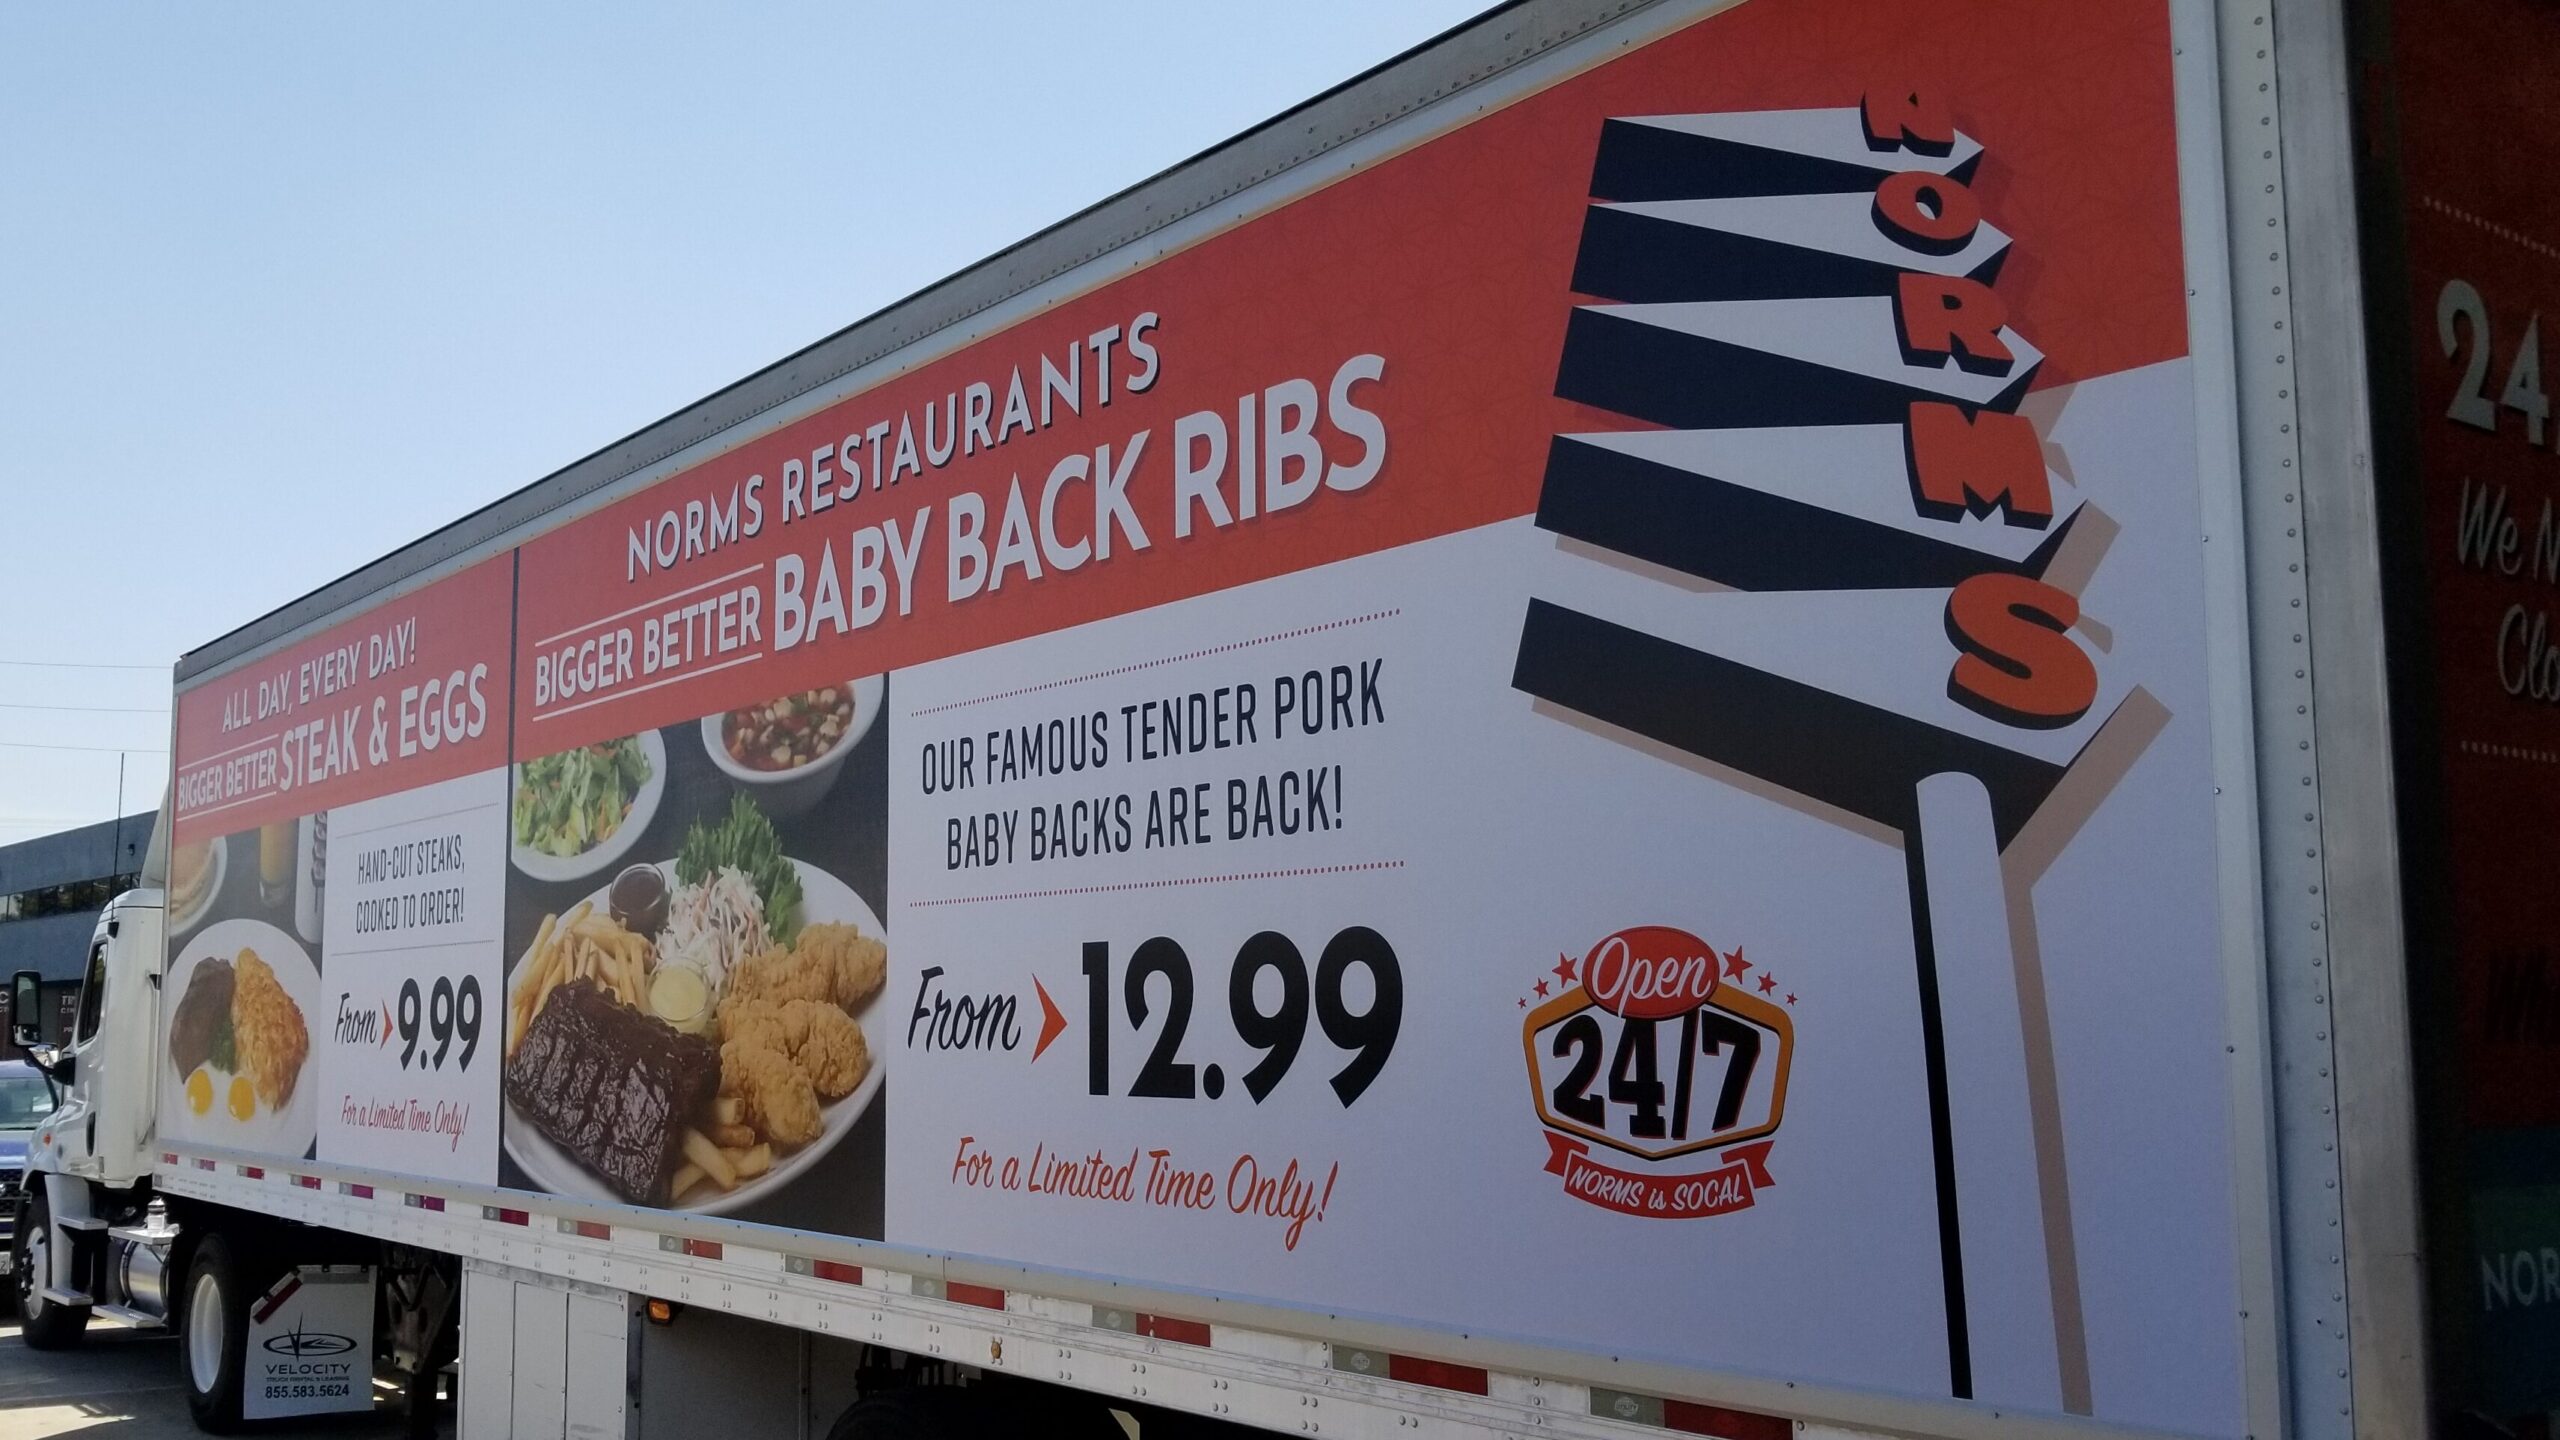 Norm's ran a limited time offer on ribs using changeable fleet graphics